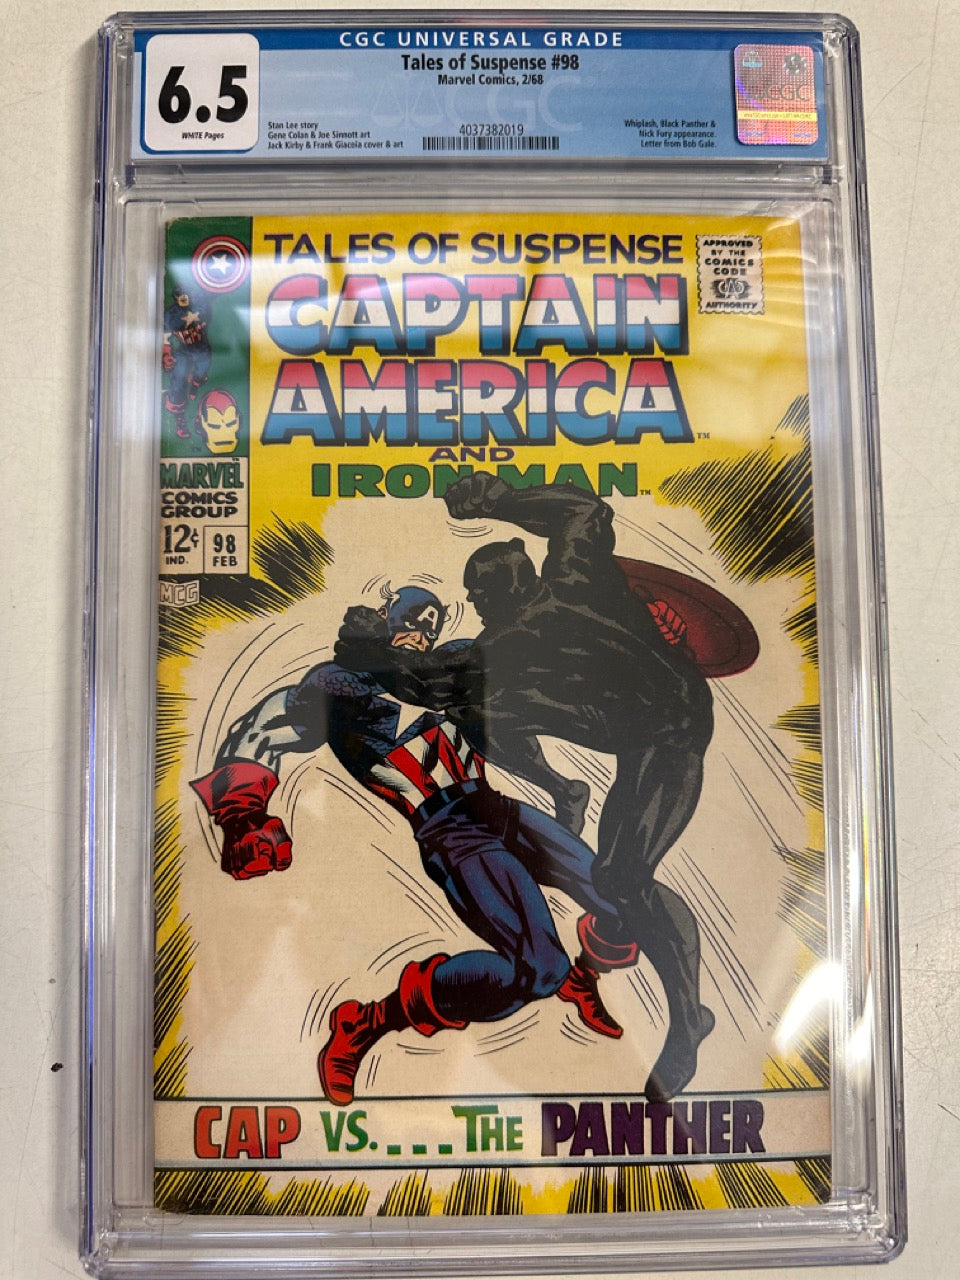 Tales Of Suspense #98 Certified Guaranty Company (CGC) Graded 6.5 - Special Appearance by Black Panther and Nick Fury